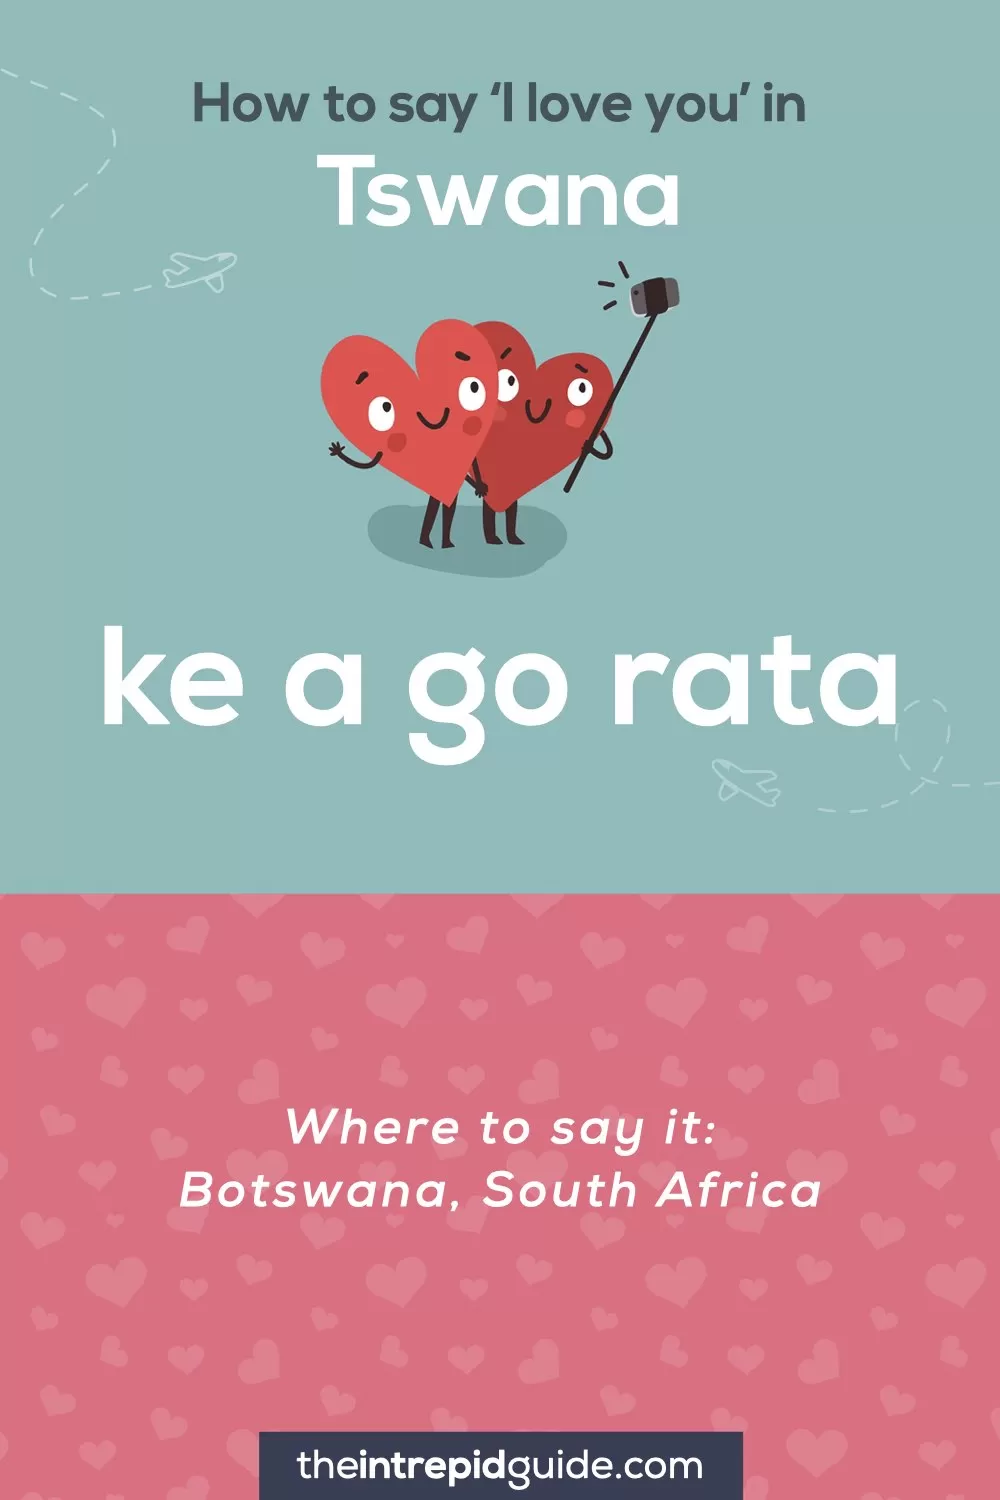 How to say I love you in different languages - Tswana - ke a go rata